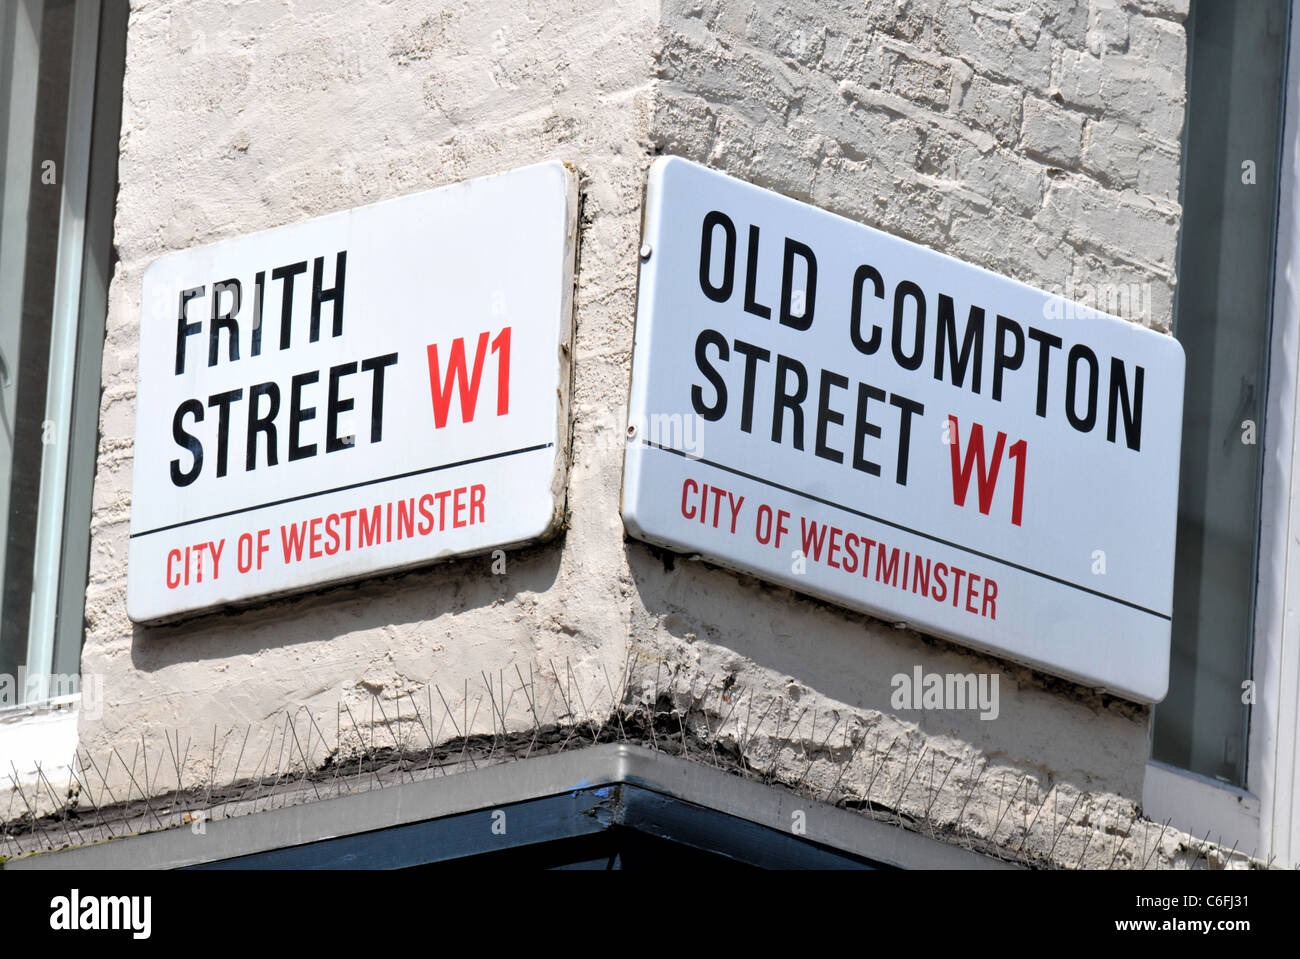 Frith Street and Old Compton Street signs, Soho, London, Britain, UK Stock Photo